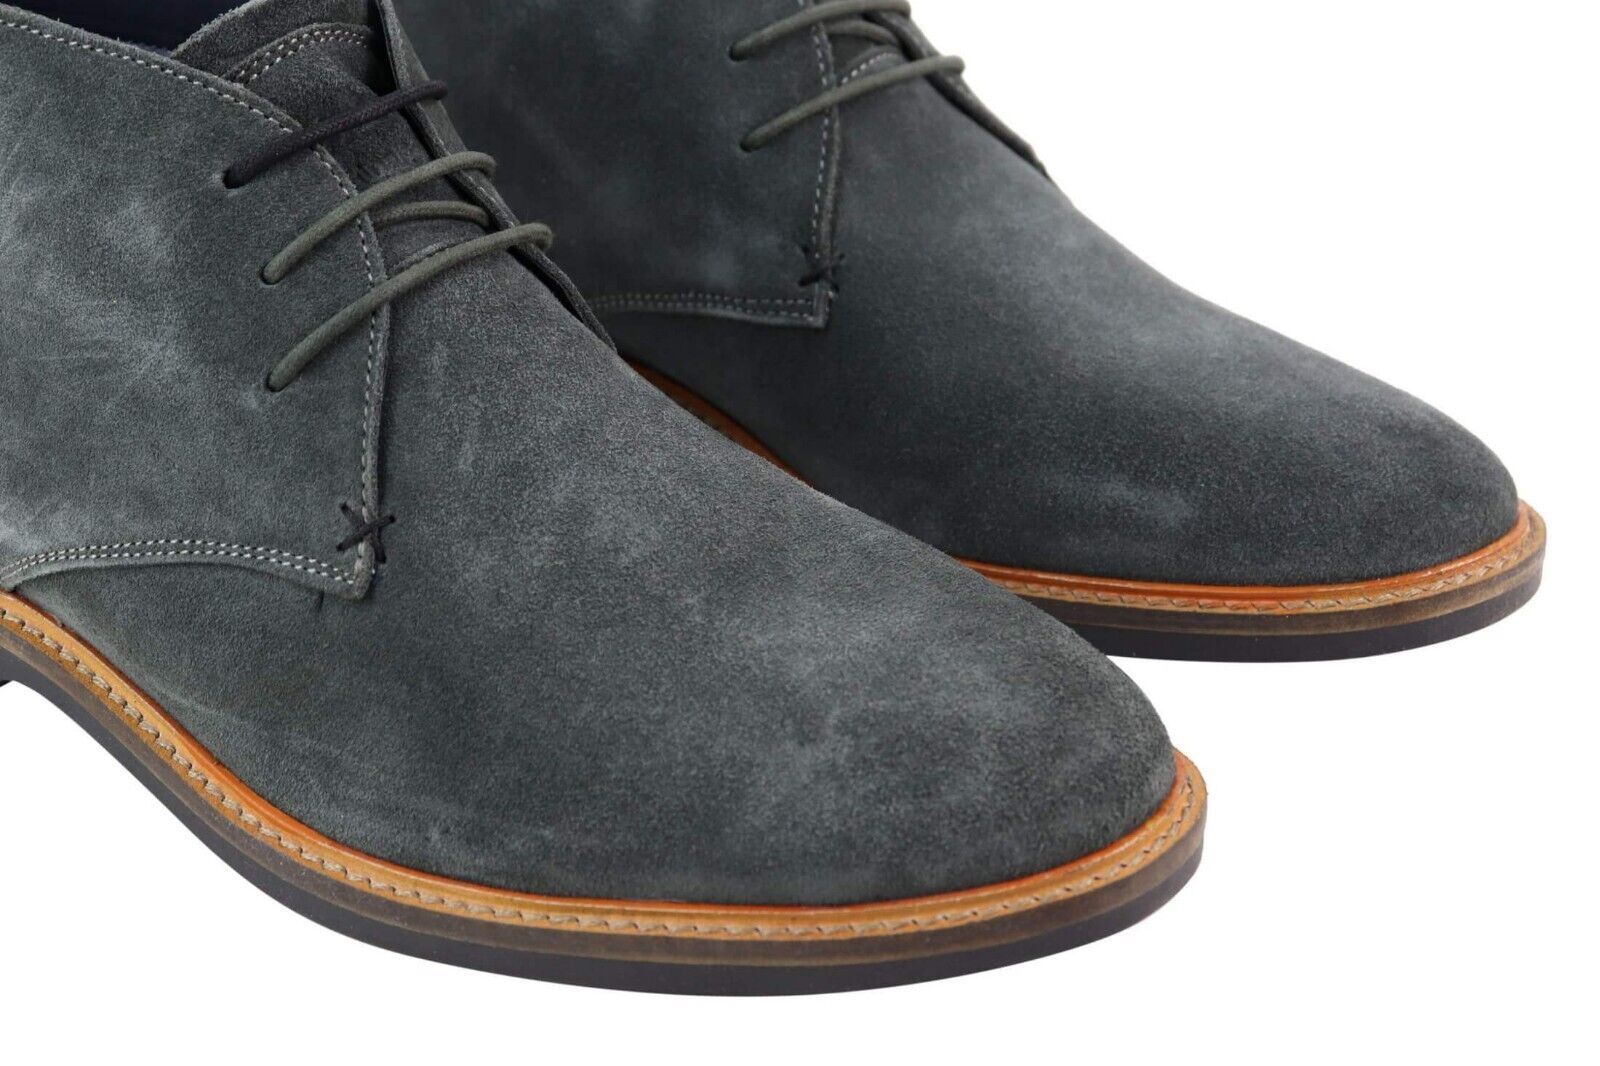 Mens Grey Suede Lace Up Chukka Boots - Upperclass Fashions 